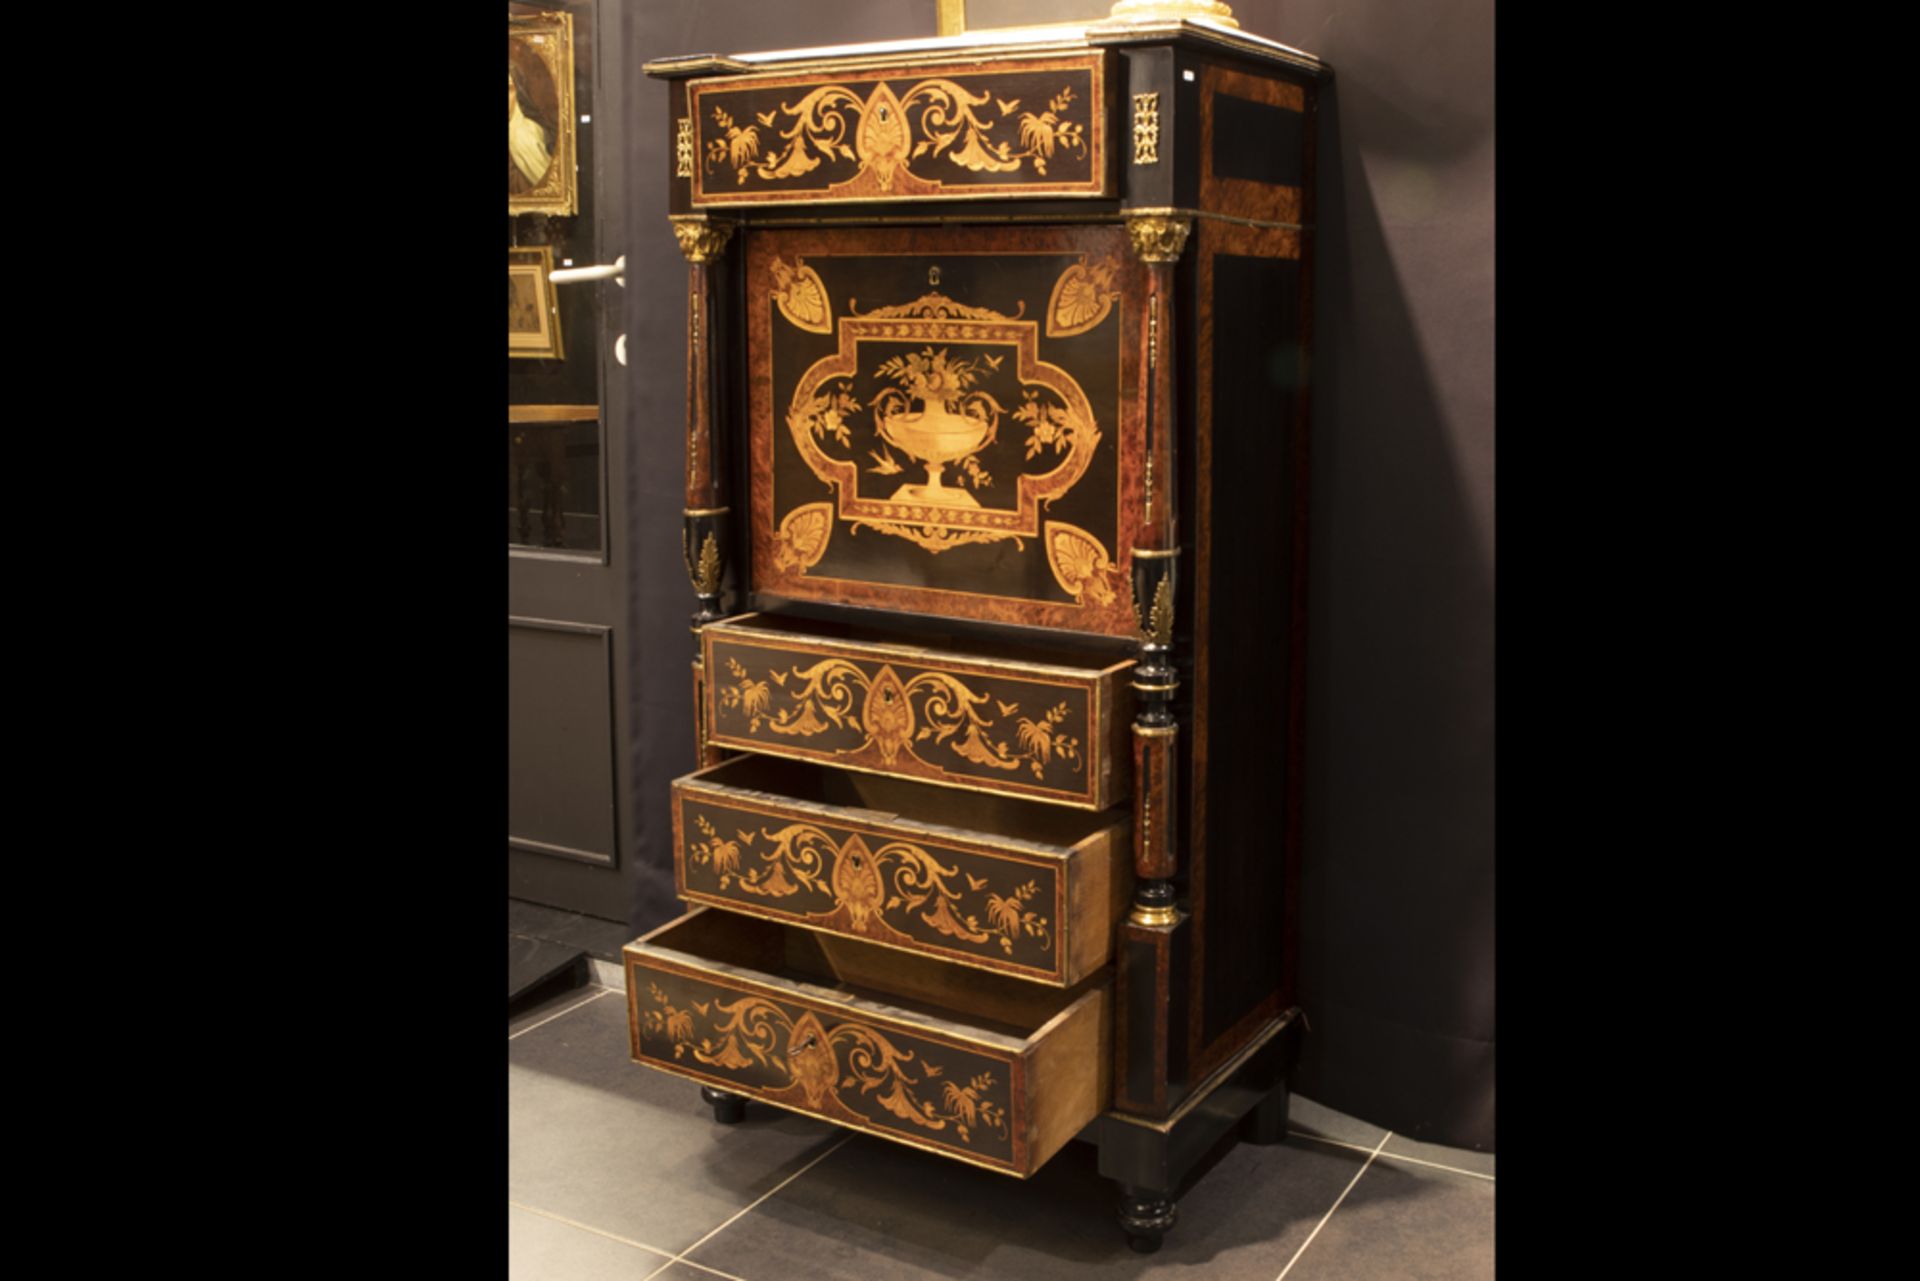 19th Cent. French neoclassical Napoleon III bureau in marquetry with mountings in gilded bronze || - Image 4 of 4